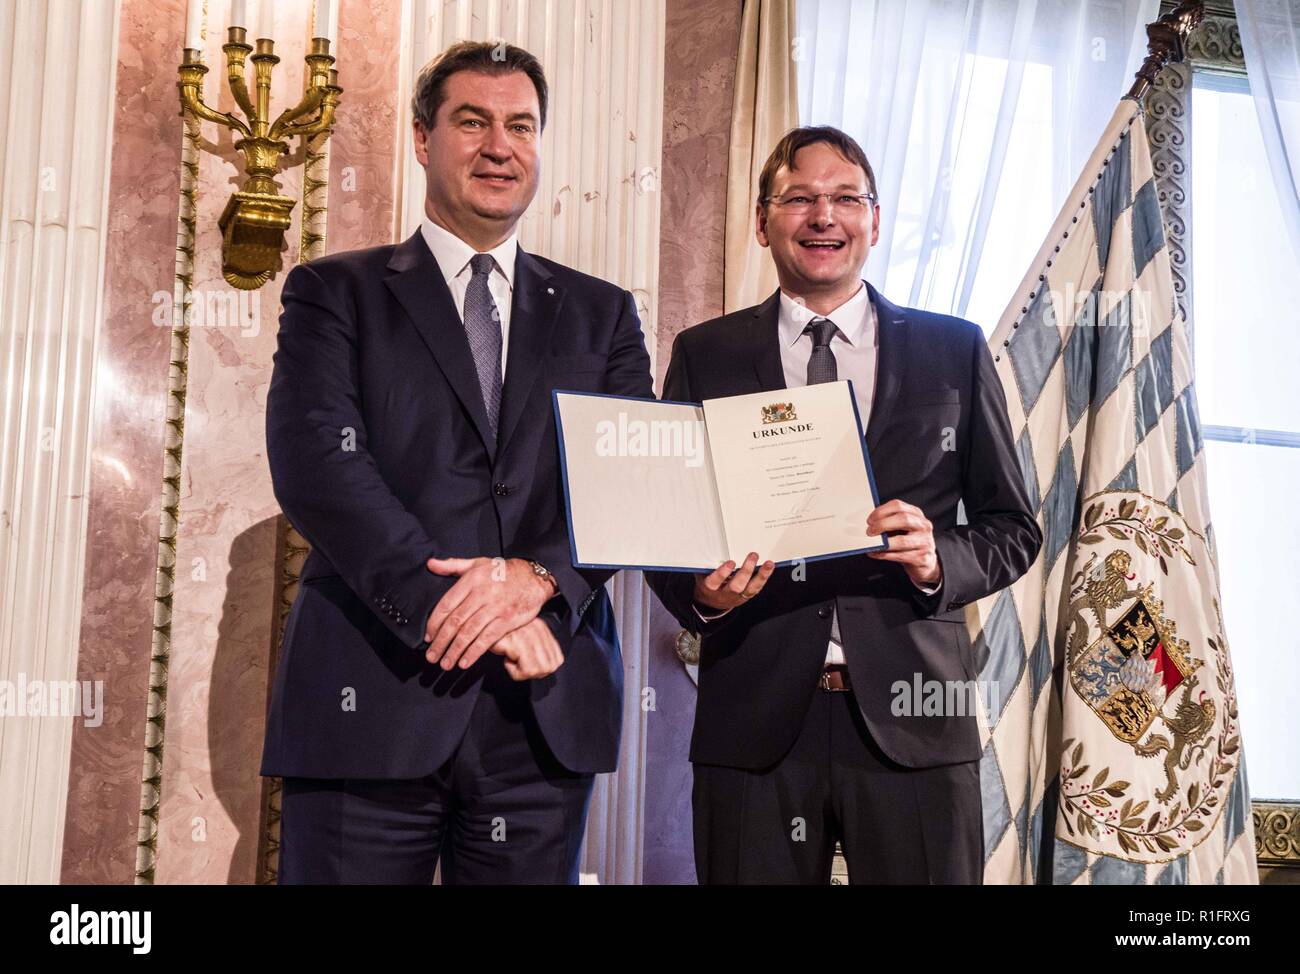 November 12, 2018 - Munich, Bavaria, Germany - Dr. Hans Reichhart Staatsministerin fÃ¼r Wohnen, Bau und Verkehr. Minister President of Bavaria MARKUS SOEDER presented the new members of his cabinet at Prinz Carl Palais.  Dr. Soeder was confirmed as Minister President on Nov. 6th and is the successor to Horst Seehofer. (Credit Image: © Sachelle Babbar/ZUMA Wire) Stock Photo